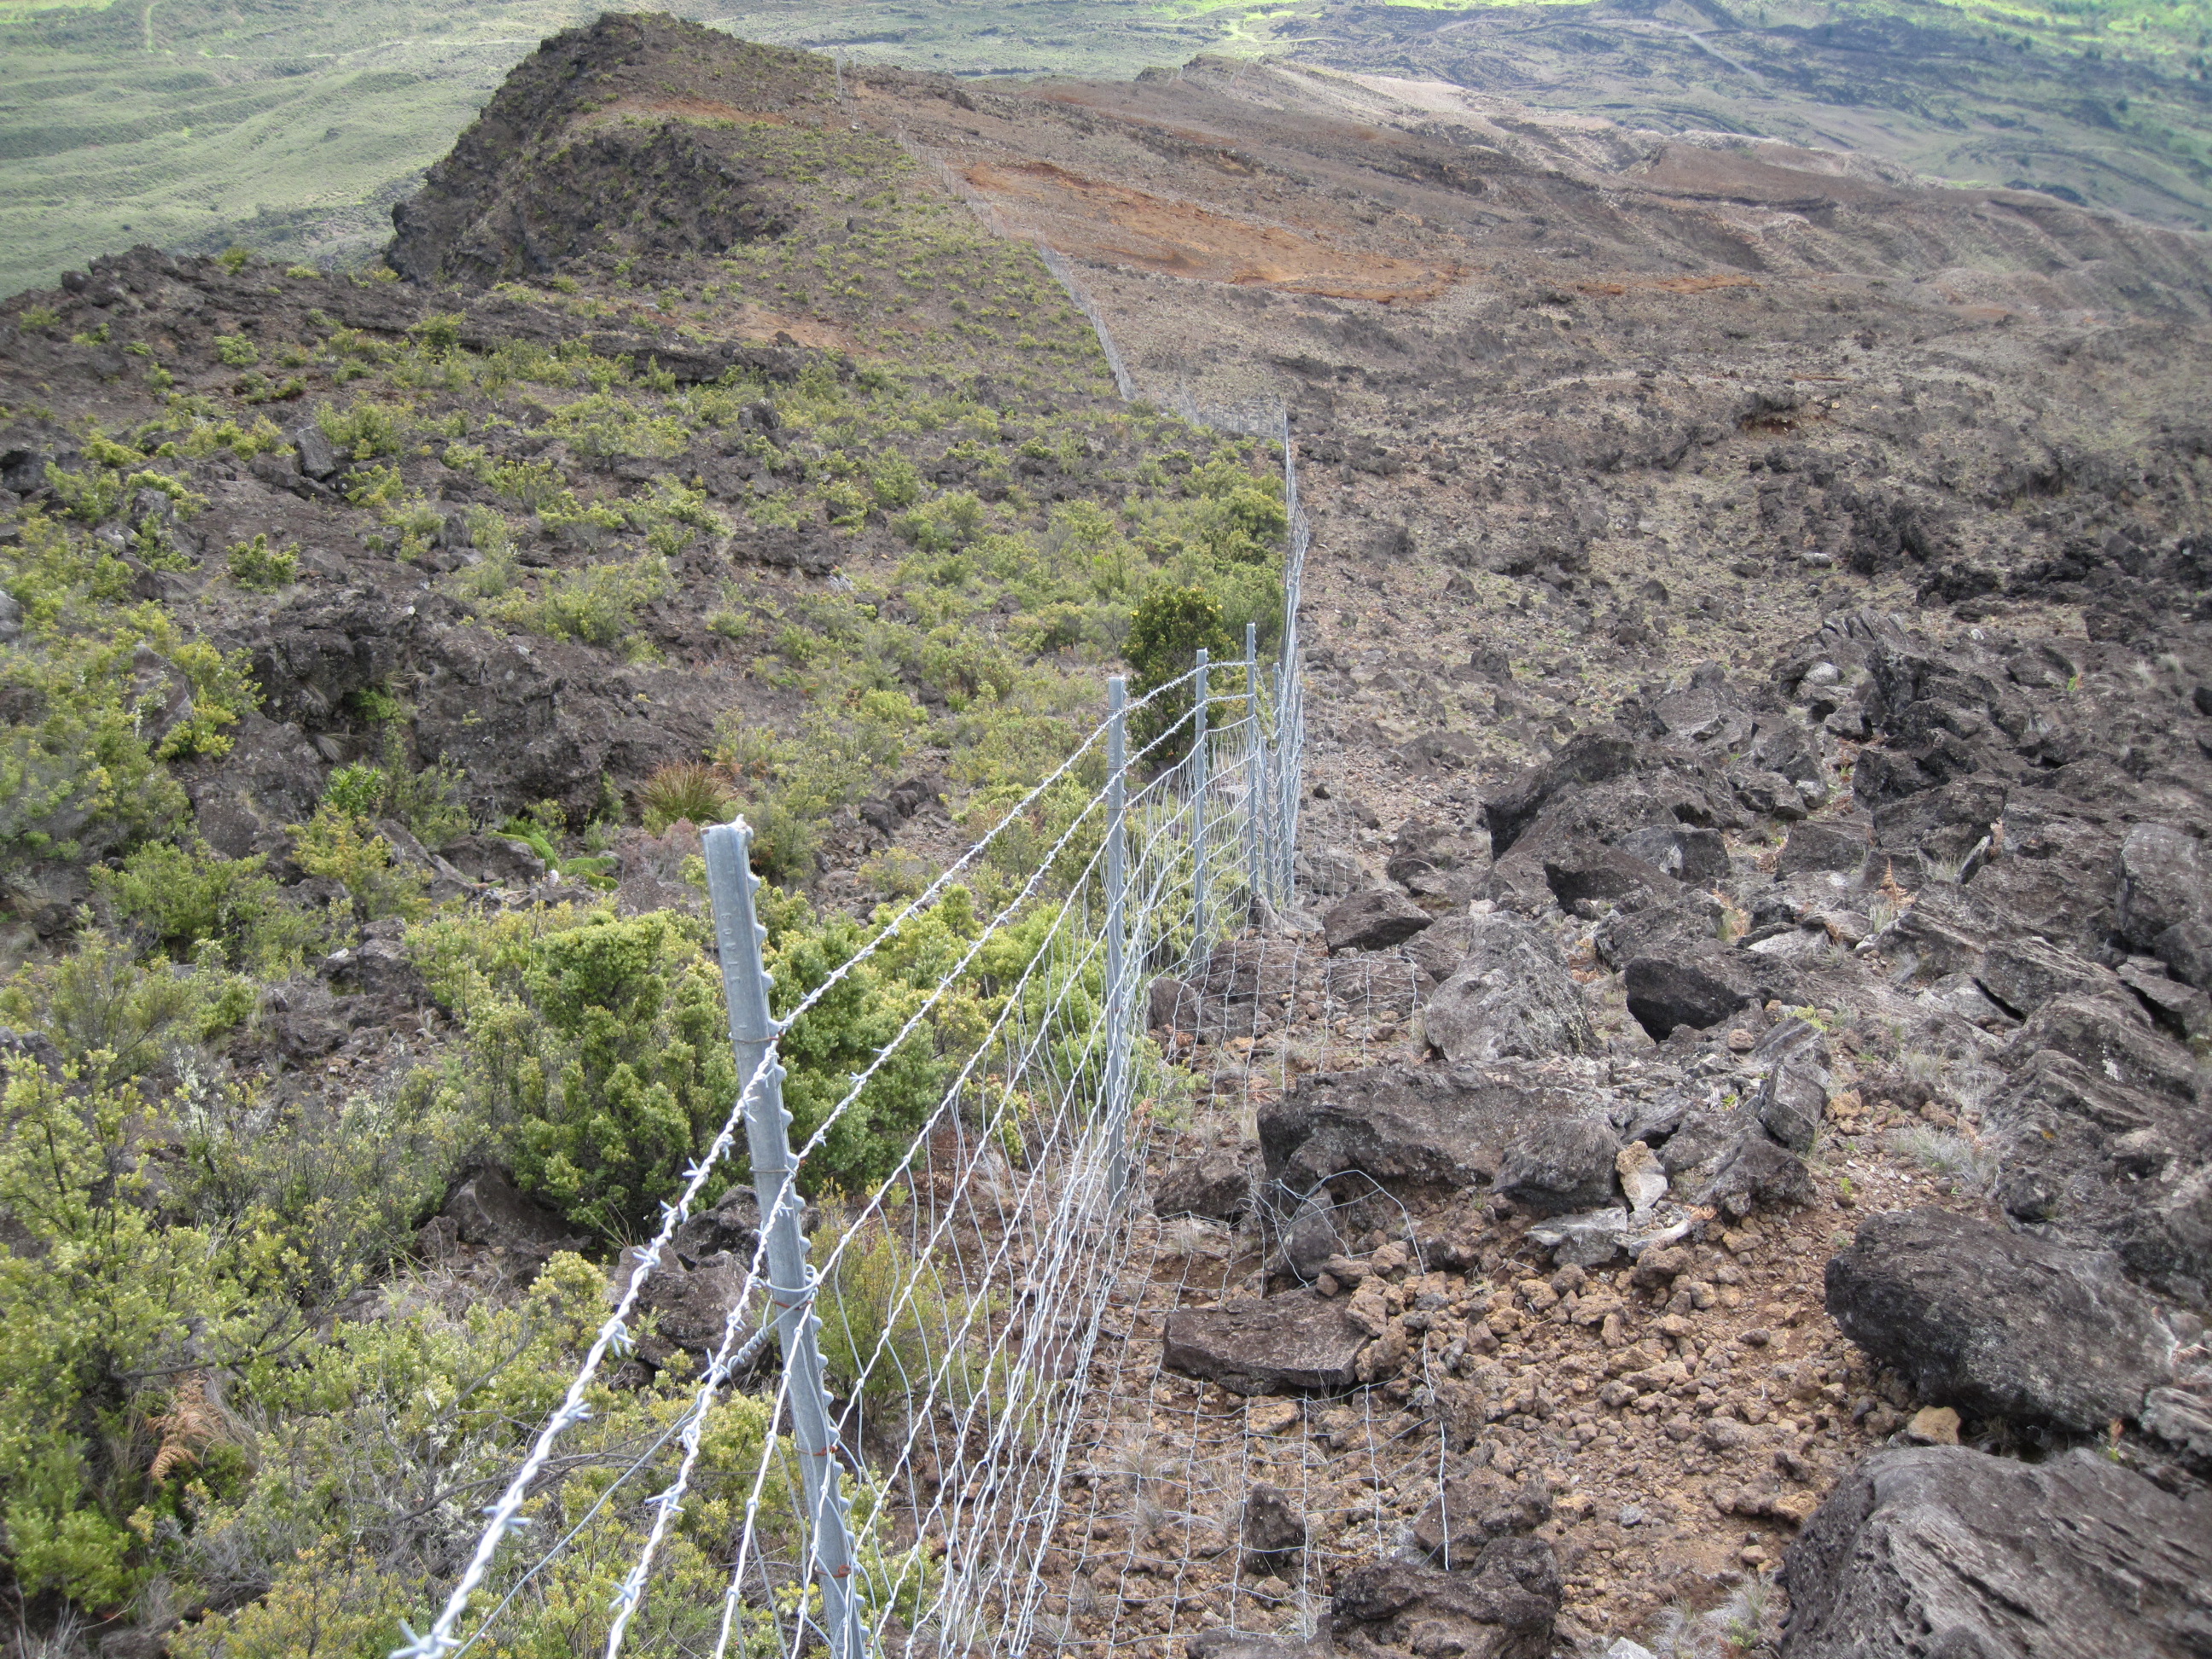 Existing park boundary fence along the upper elevations near Nu'u and Kaupo Gap. Left side shows habitat recovery. Right side shows areas impacted by feral animals.